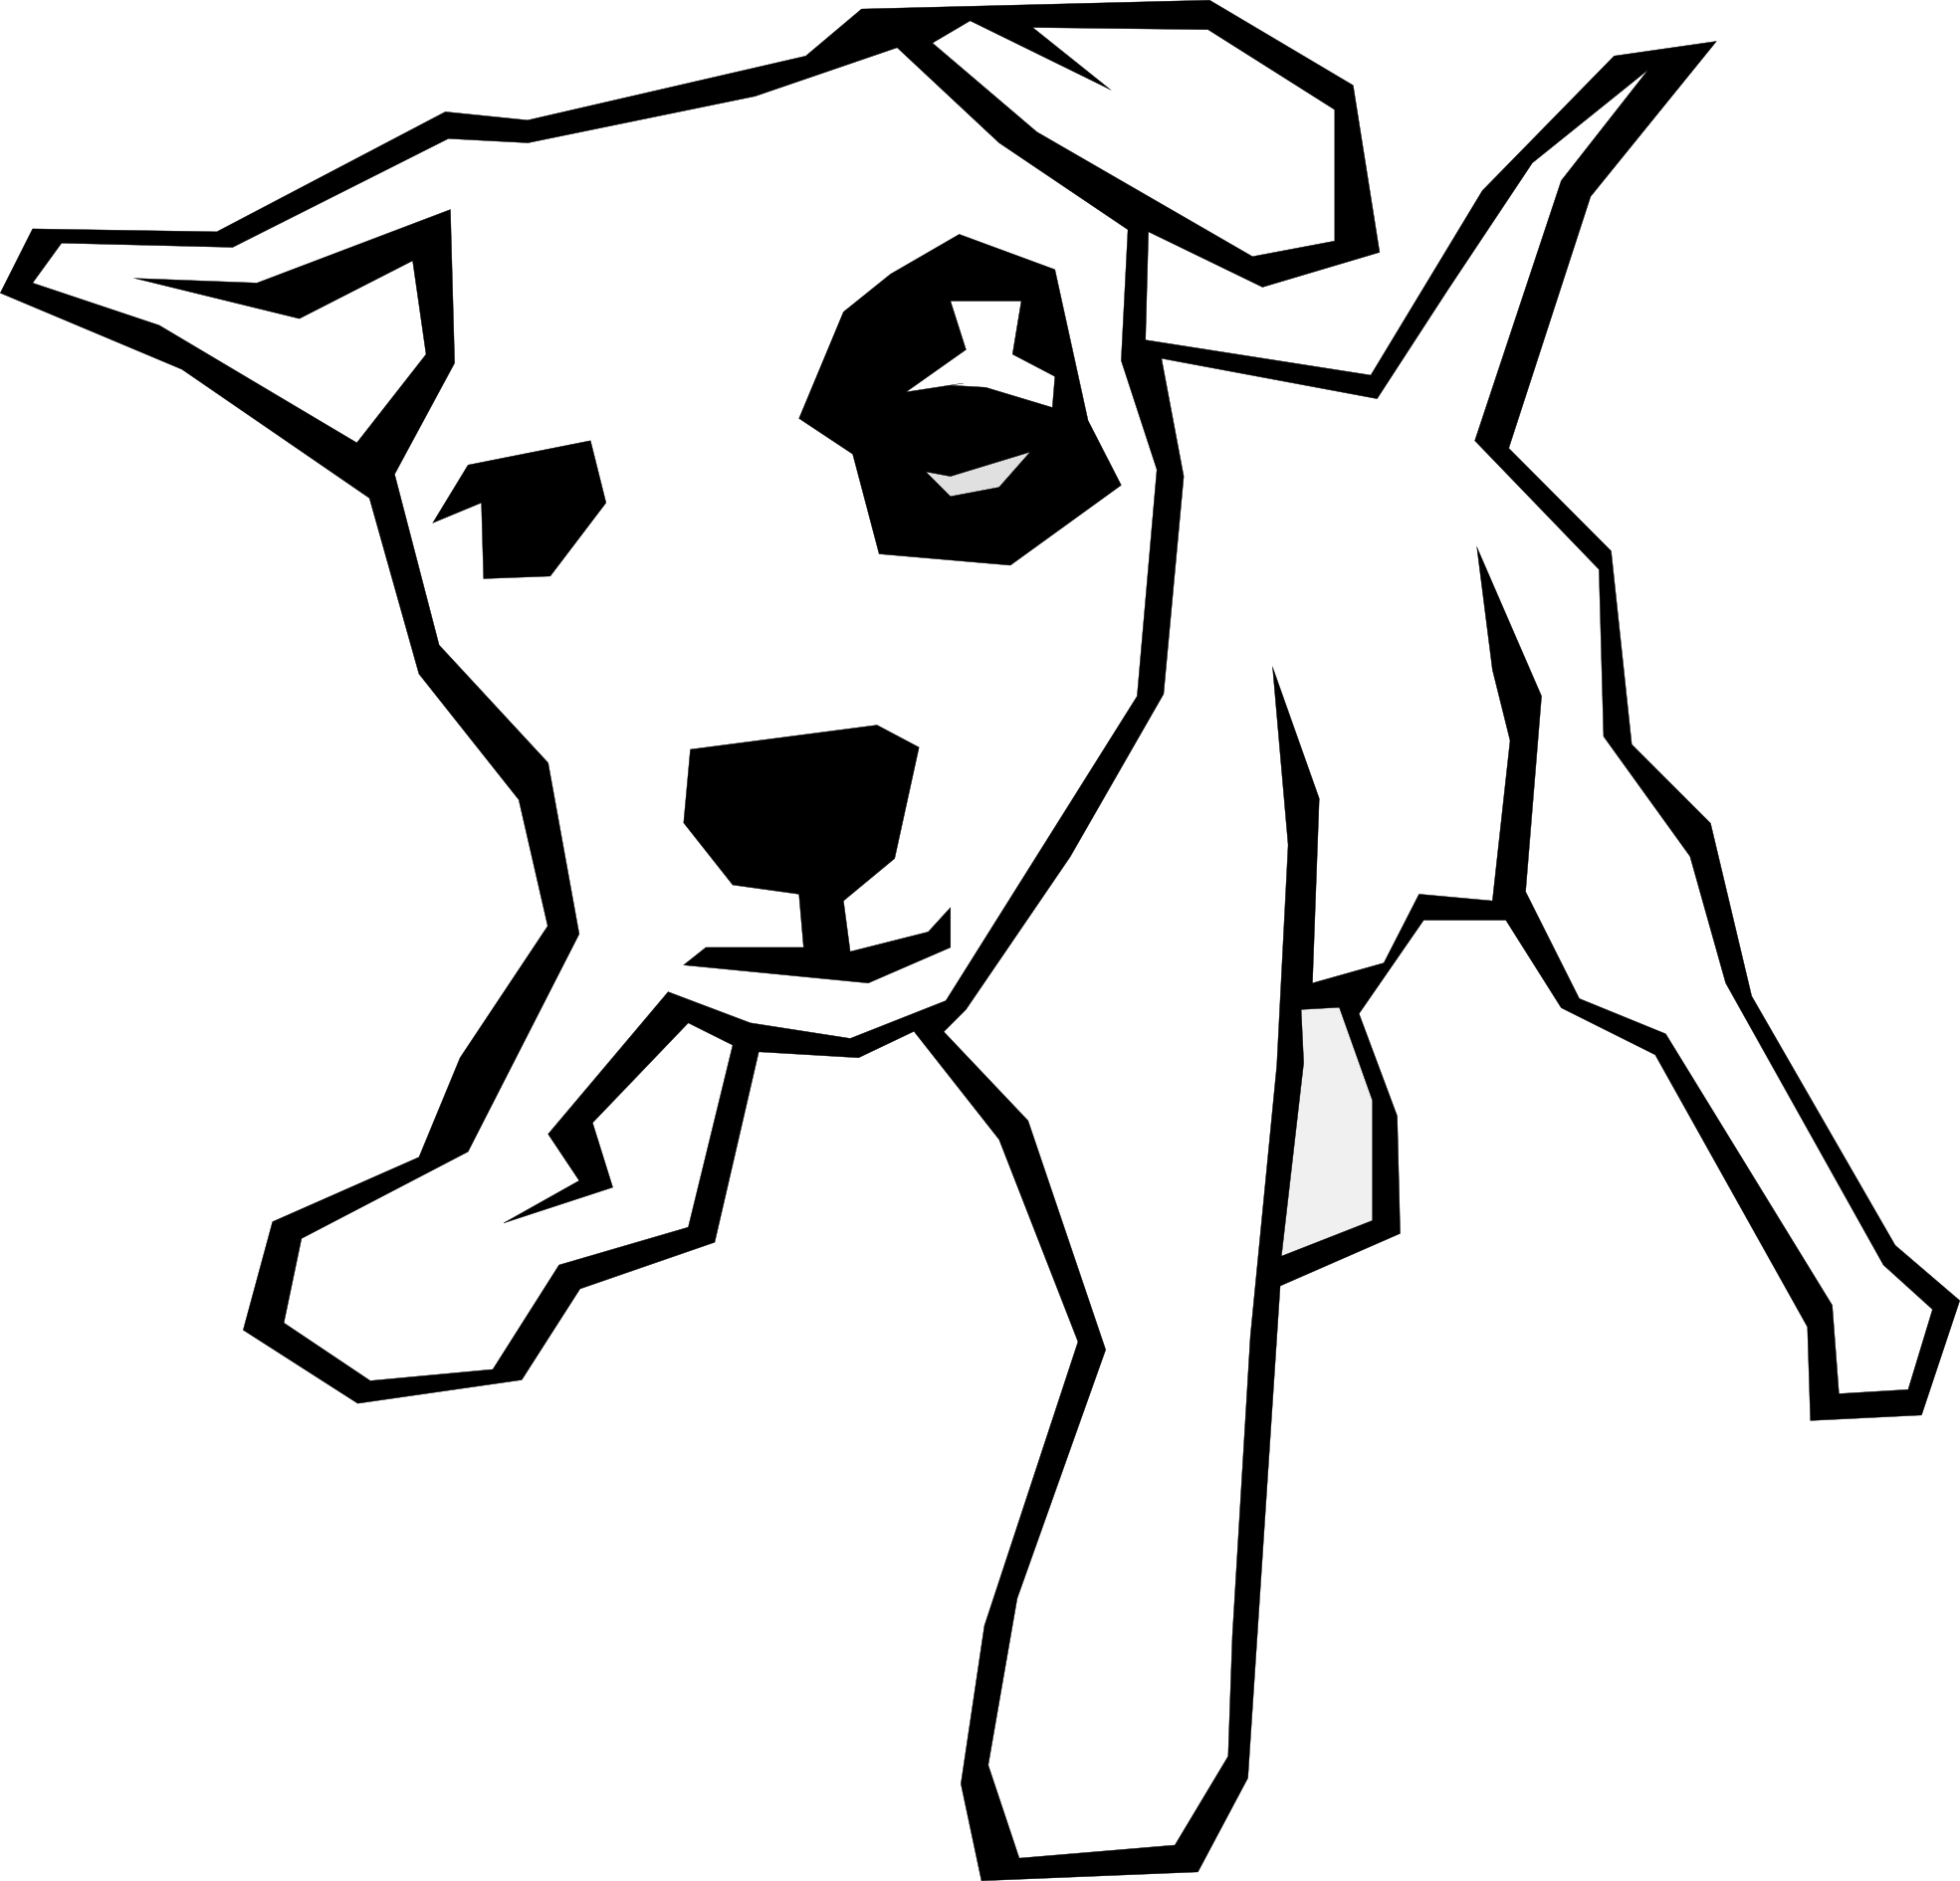 Dog Bone Clip Art Black And White | Clipart library - Free Clipart 